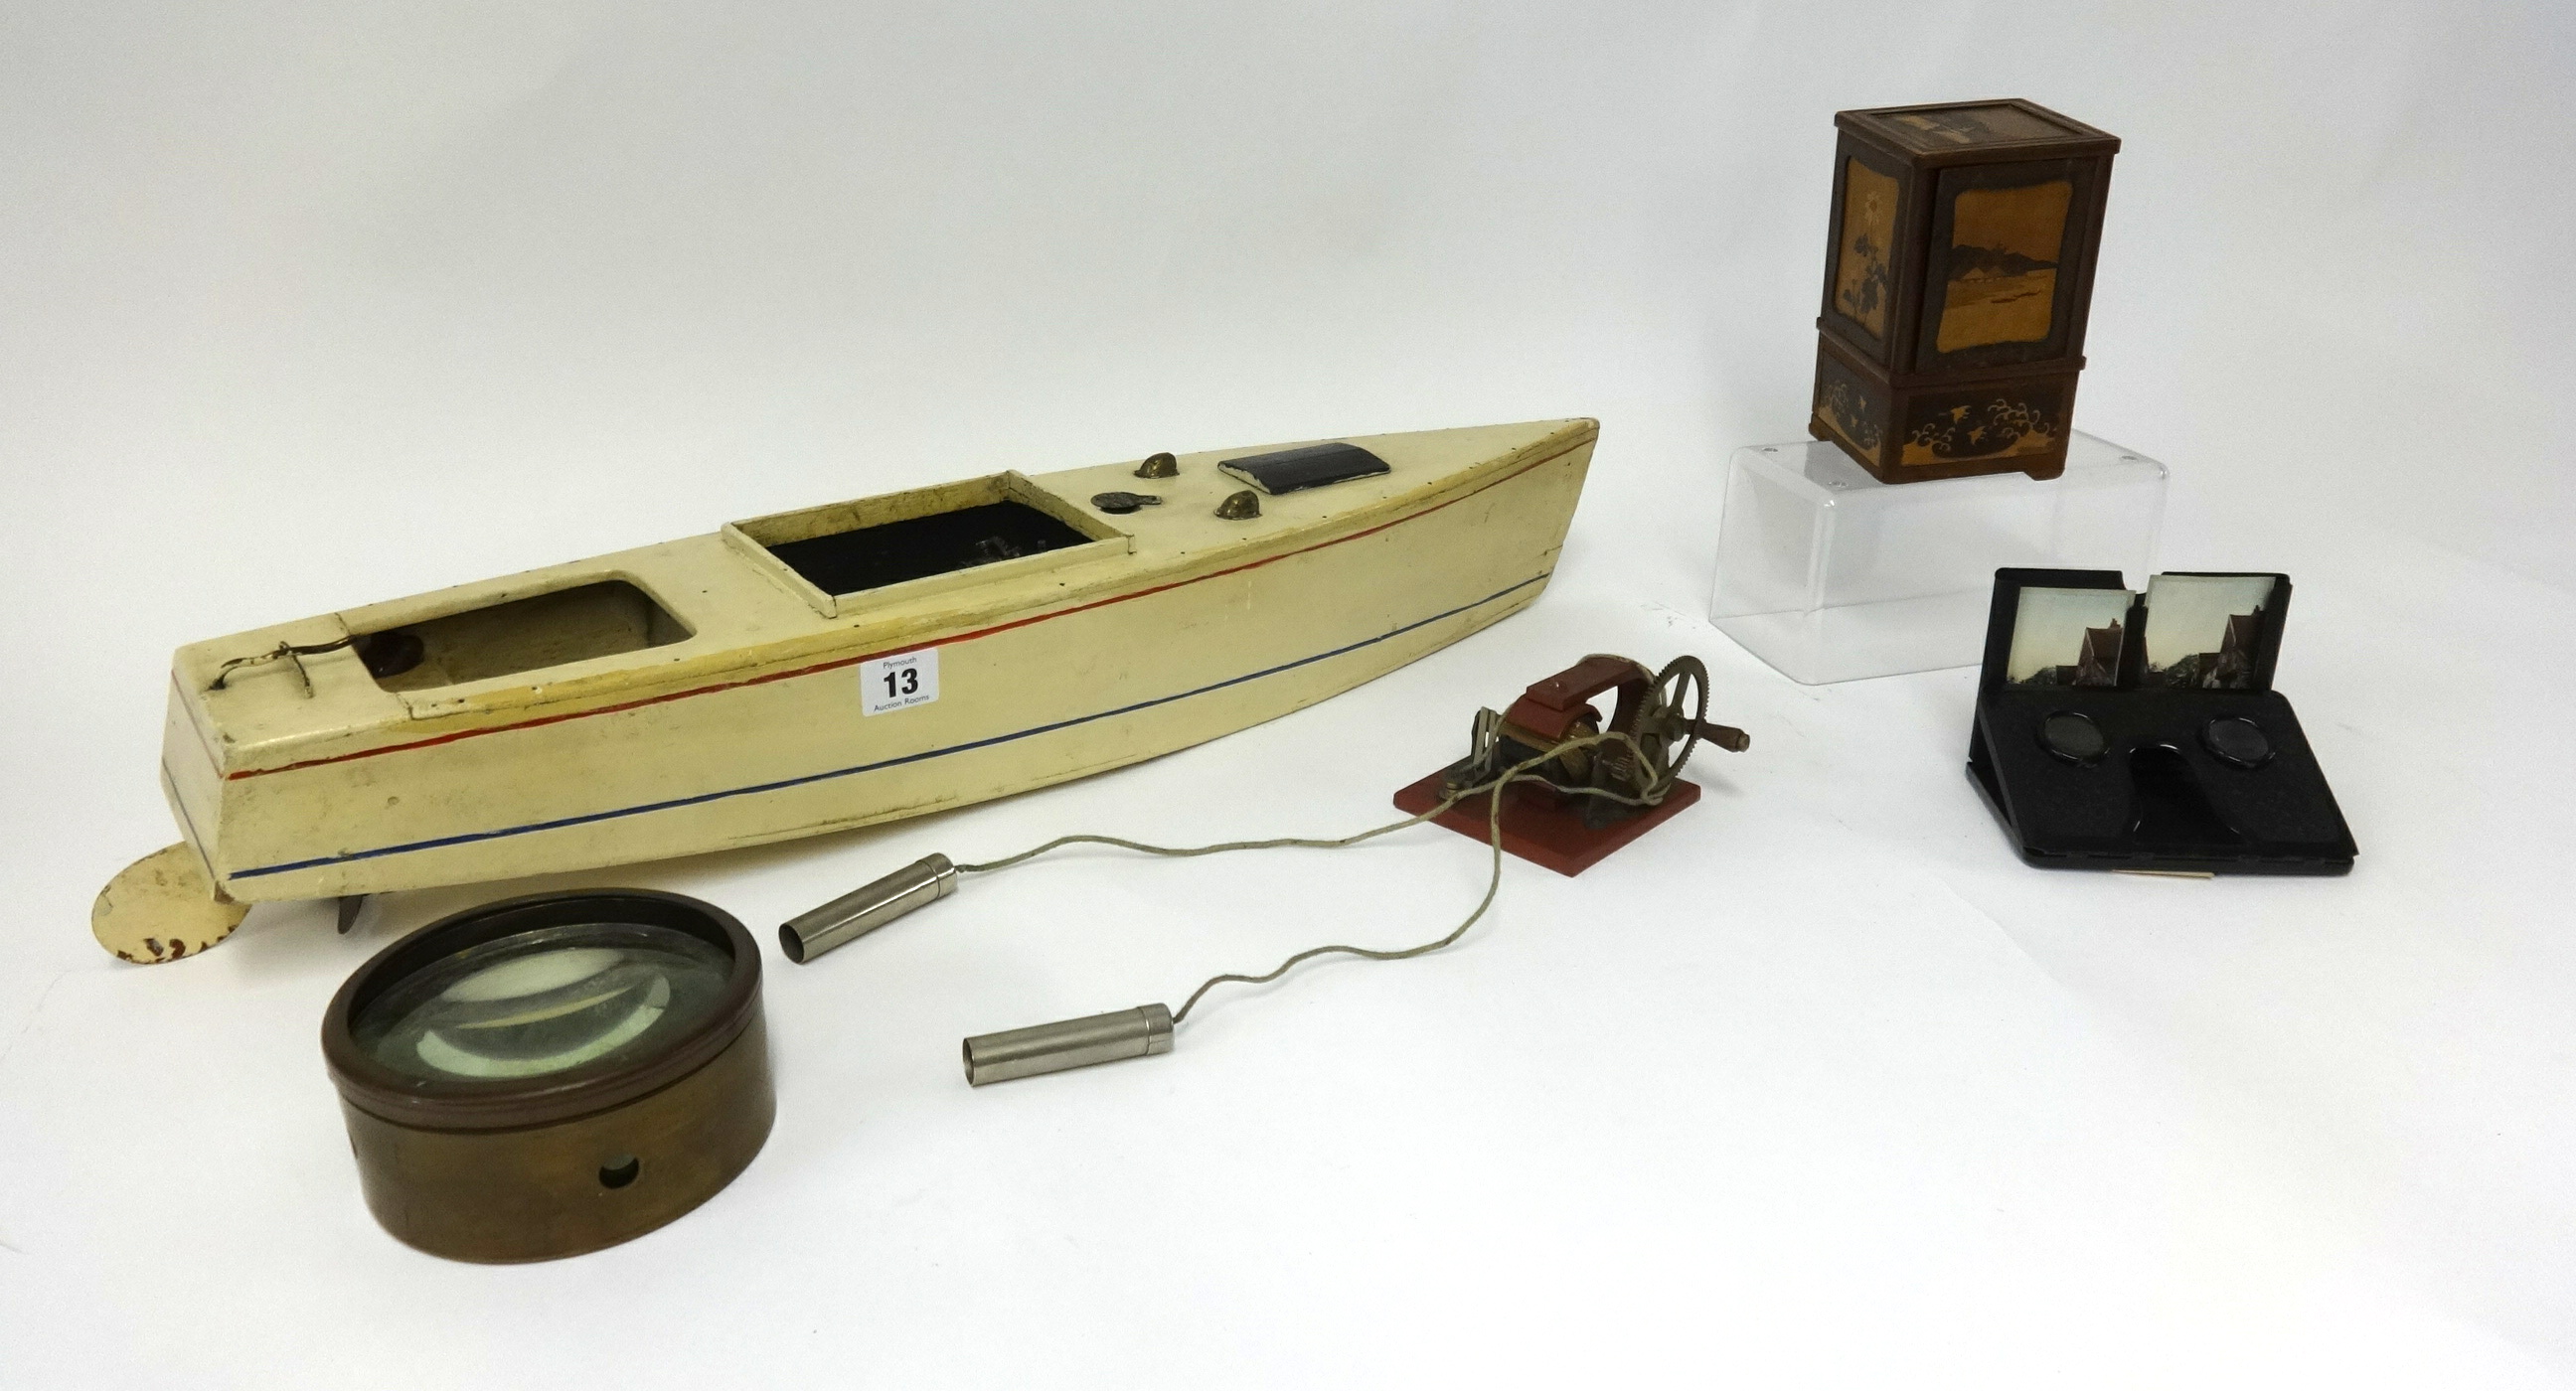 A model Meccano boat, puzzle ball, novelty wood ware, swan fountain pens, boxed card games,